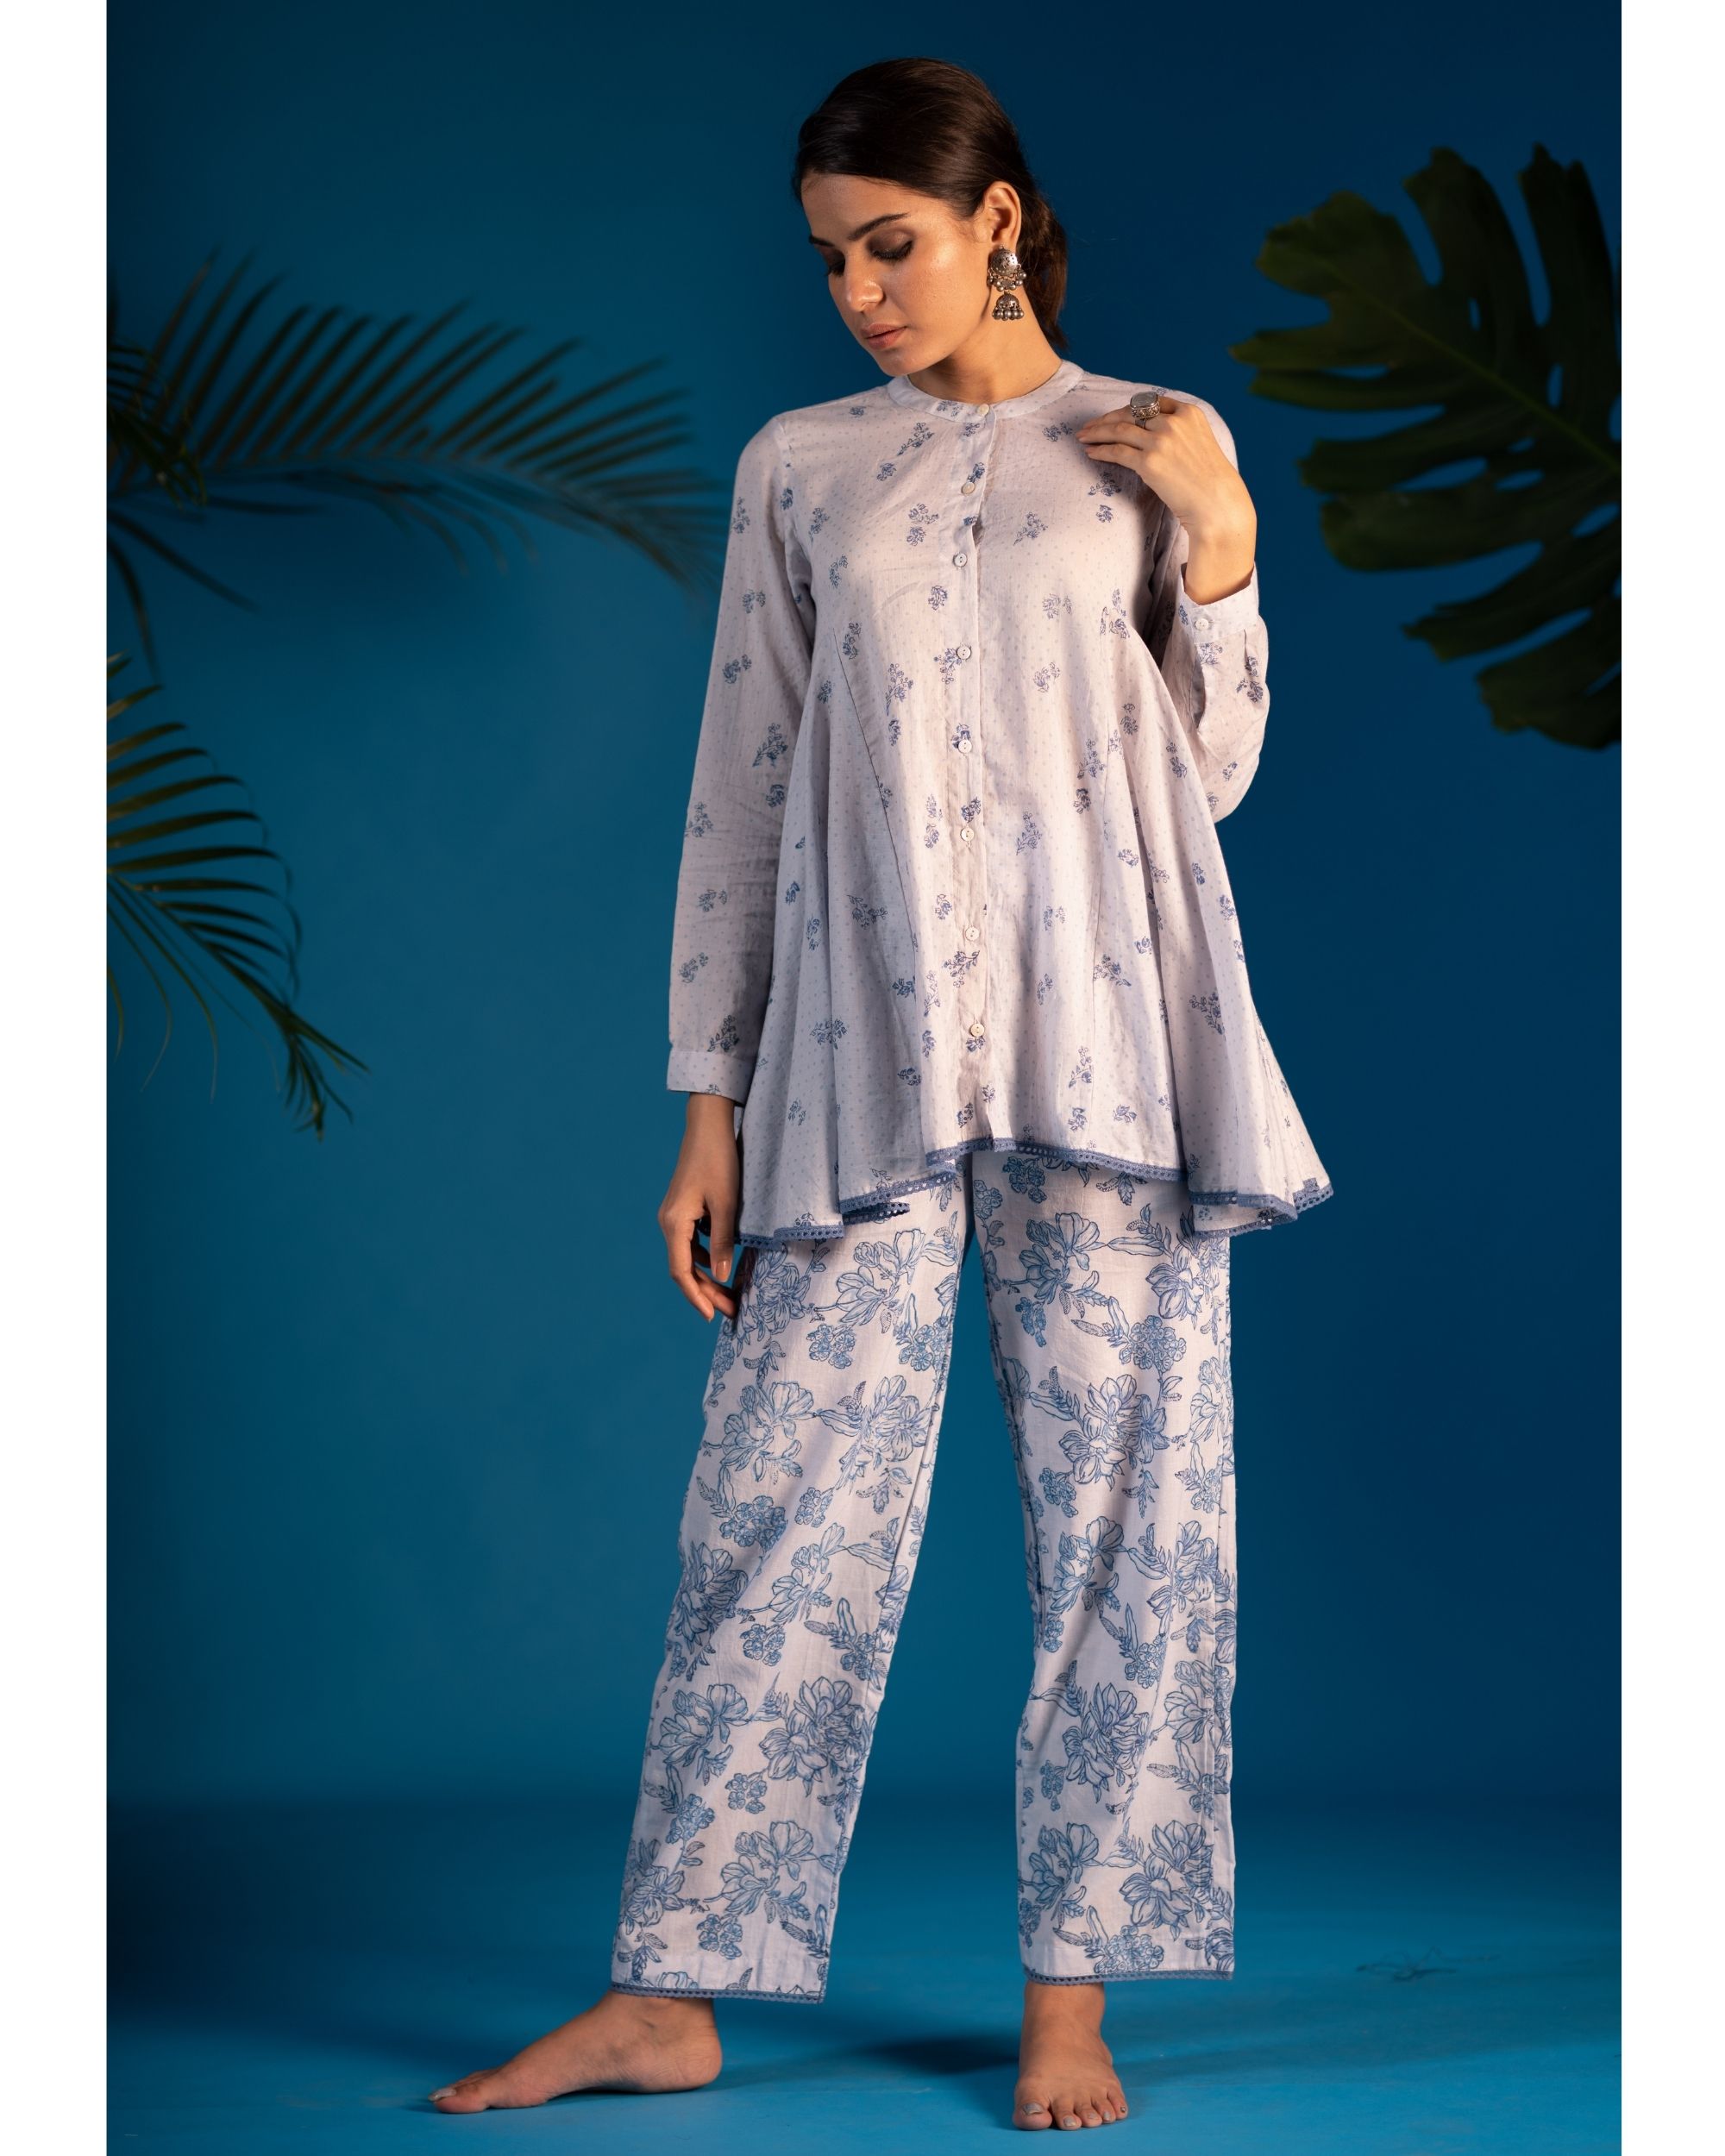 Off-white and blue front open flare top by Pants and Pajamas